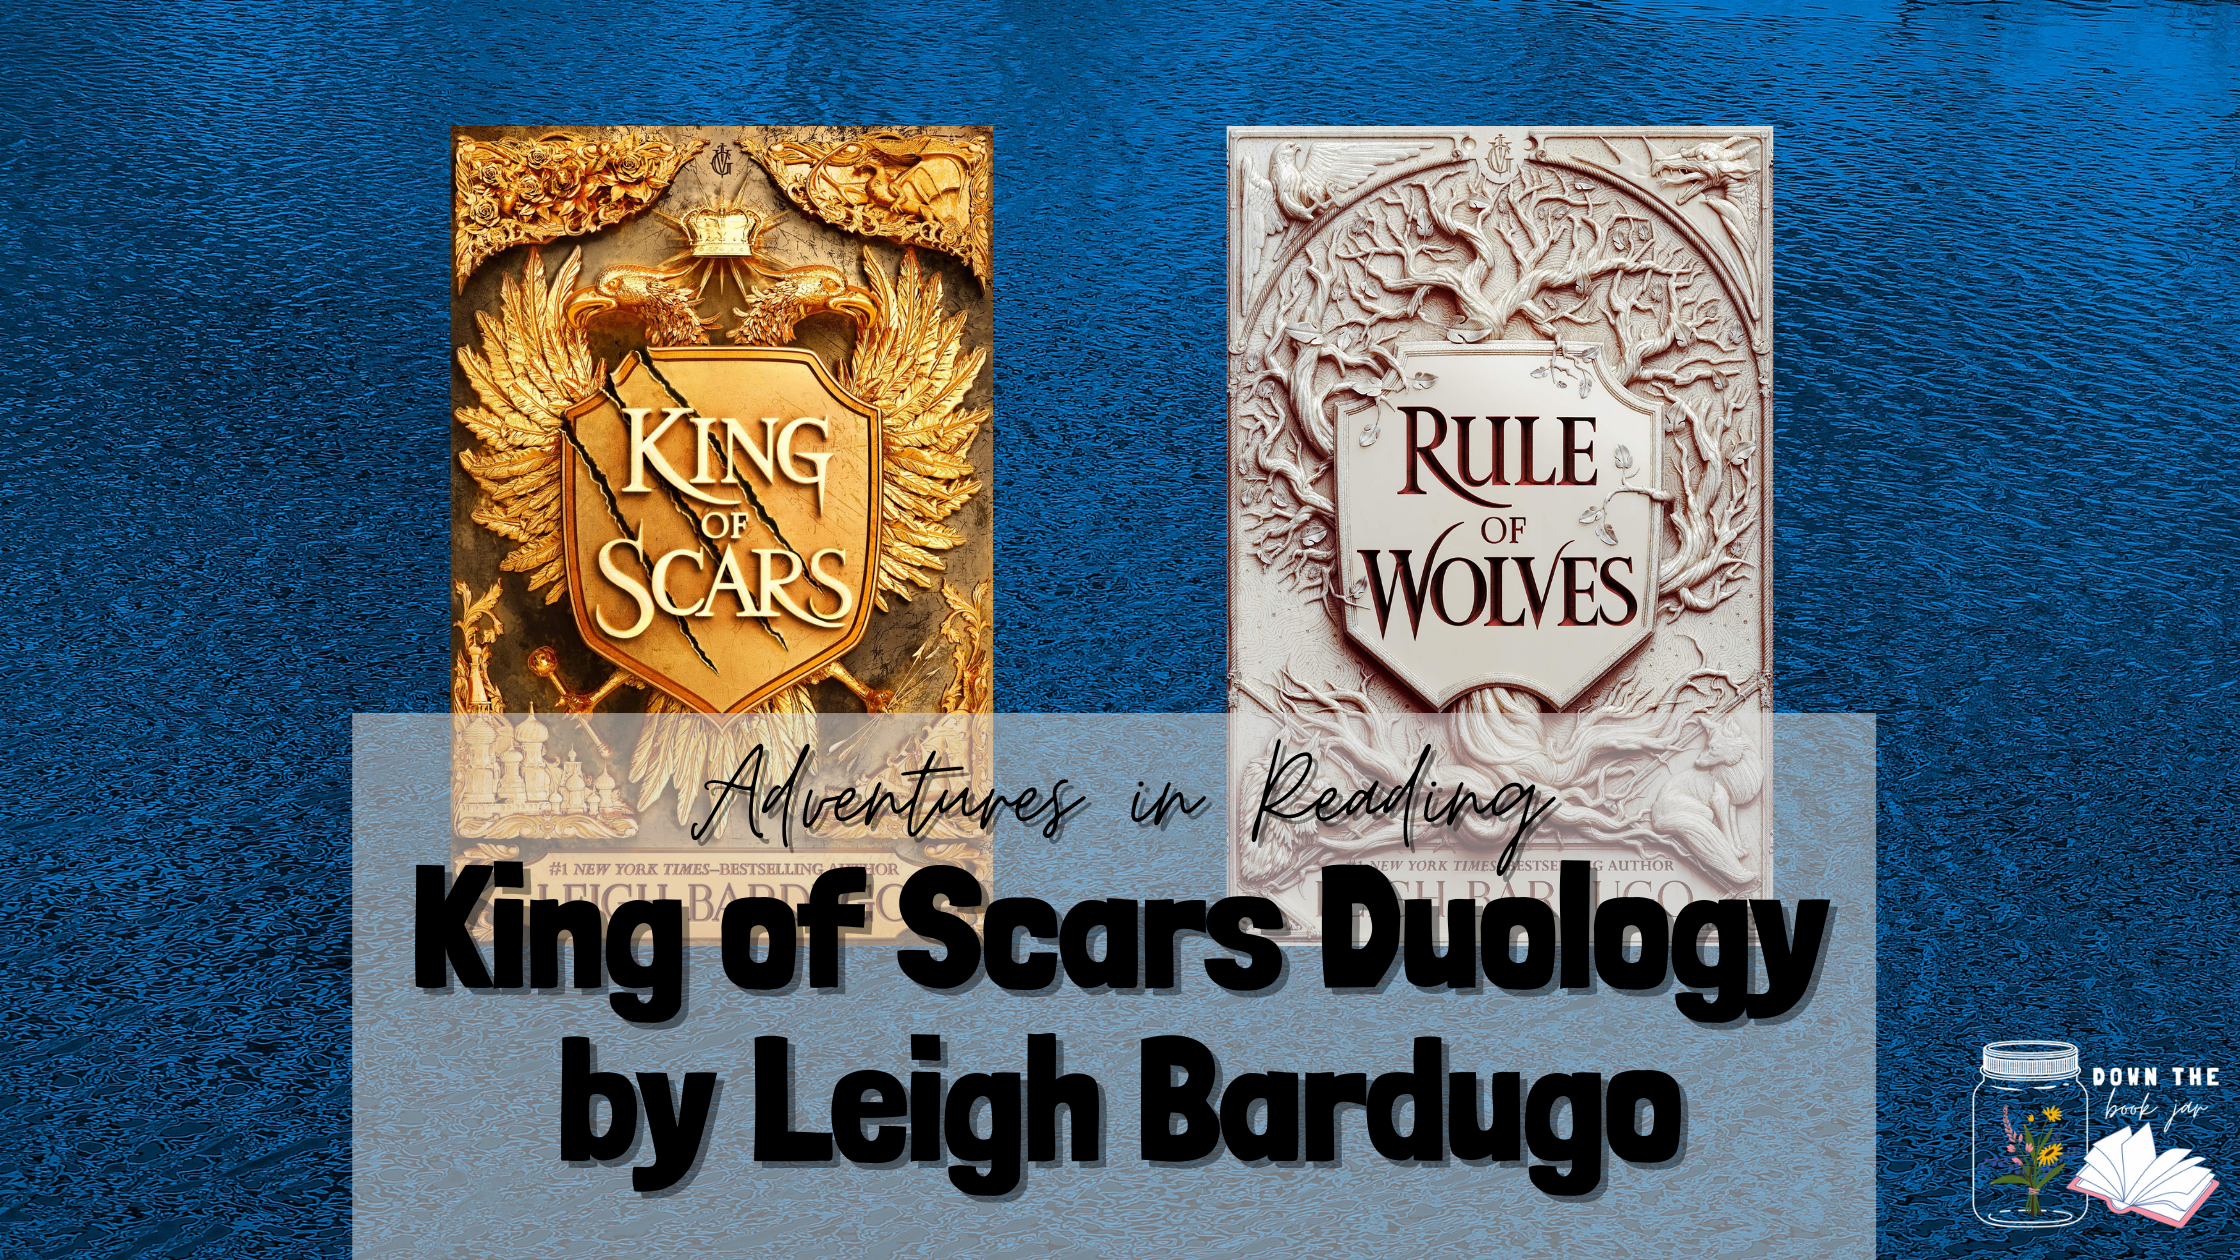 King of Scars Duology by Leigh Bardugo